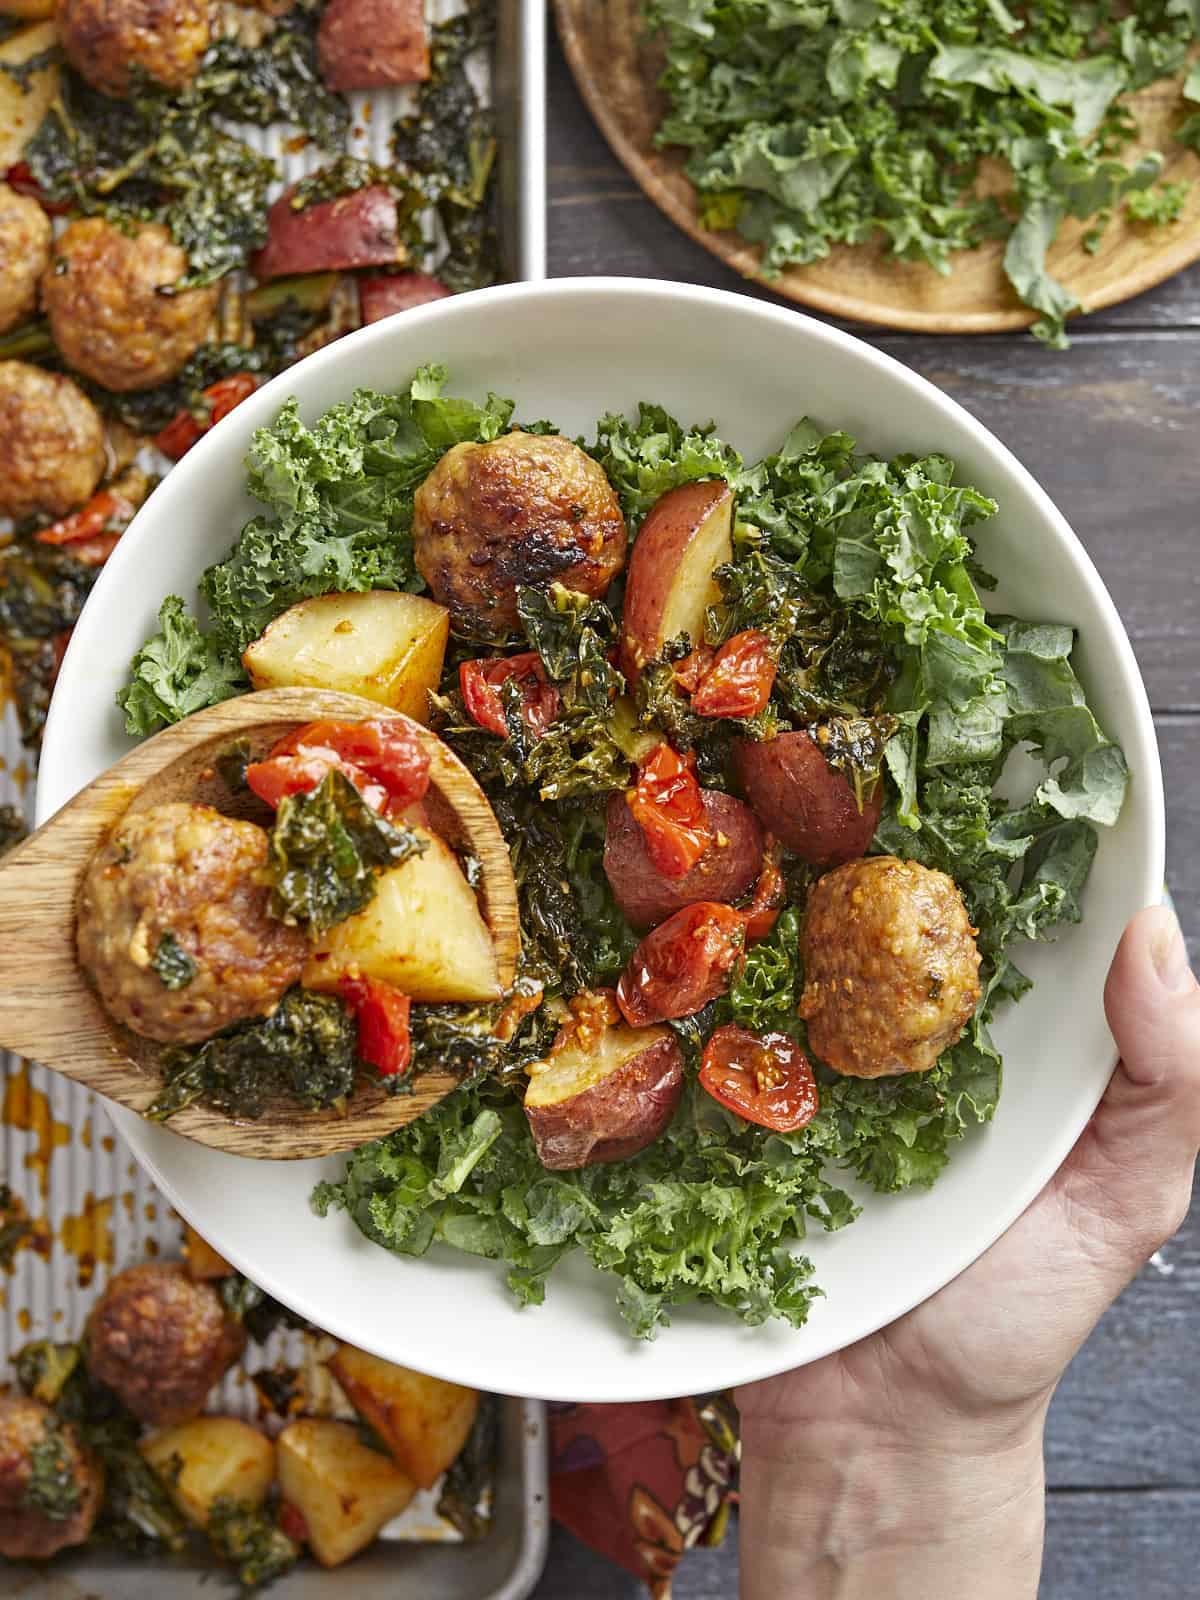 Overhead shot of Sausage Meatball and Kale Sheet Pan Meal in a white bowl with a hand holding the bowl and a wooden spoon serving a portion into the bowl.